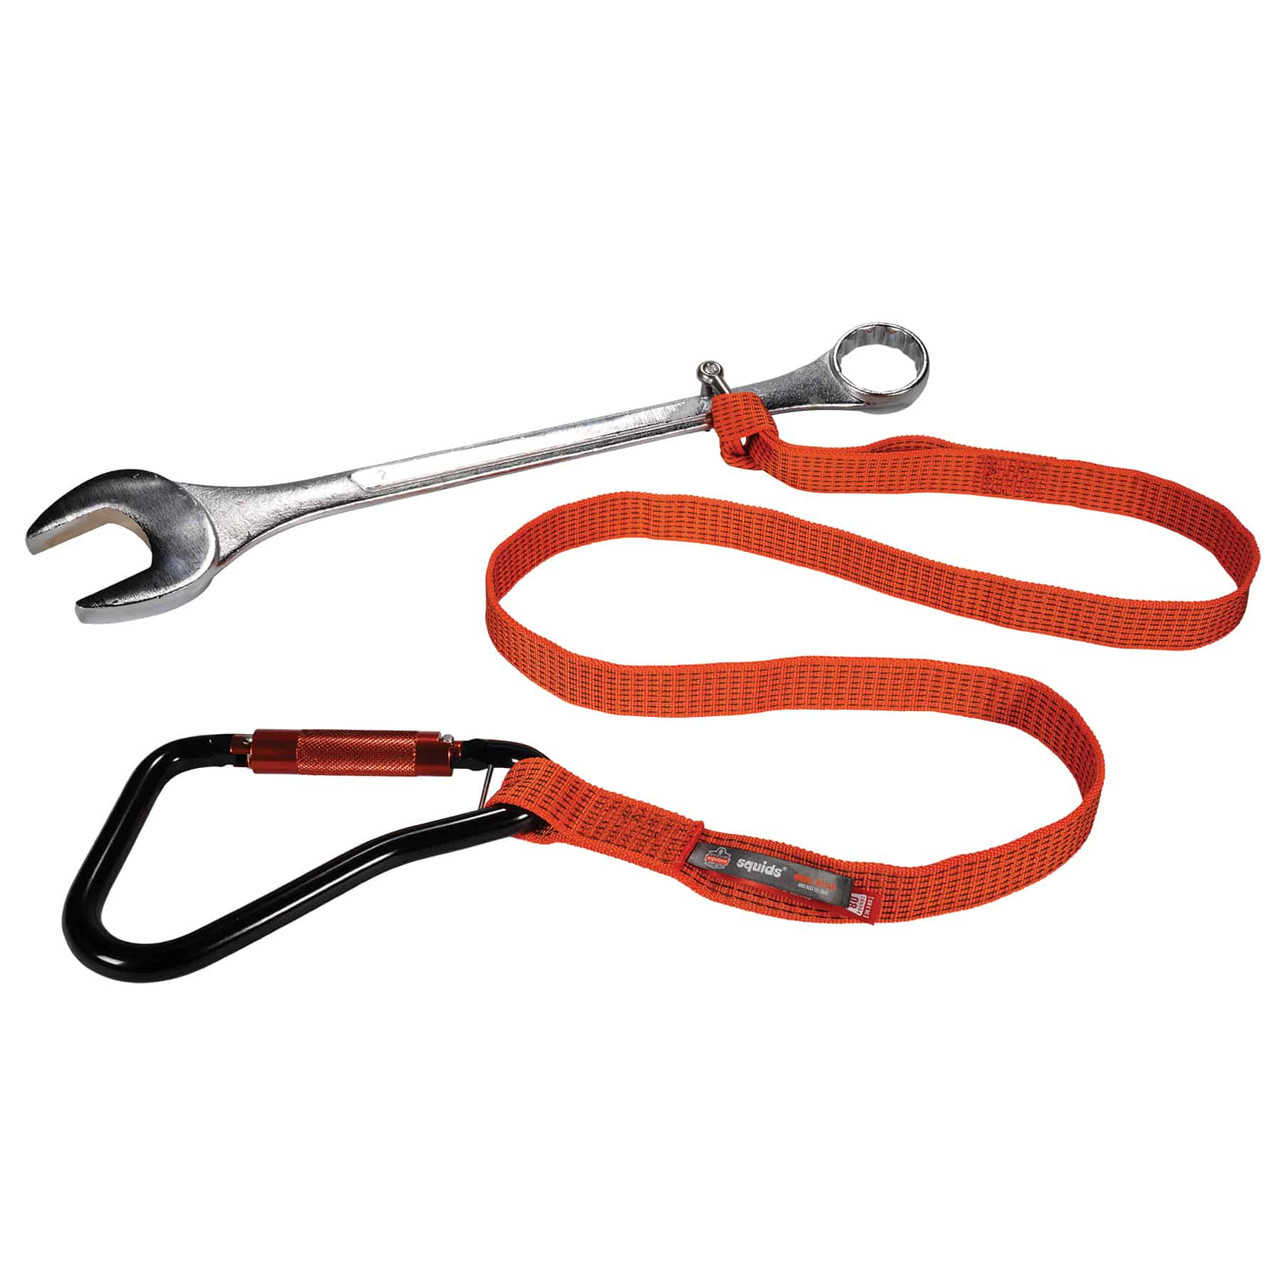 Harness Depot Tool Lanyard with Swivel Carabiner and Captive Eye Carabiner  15lbs. - The Harness Depot